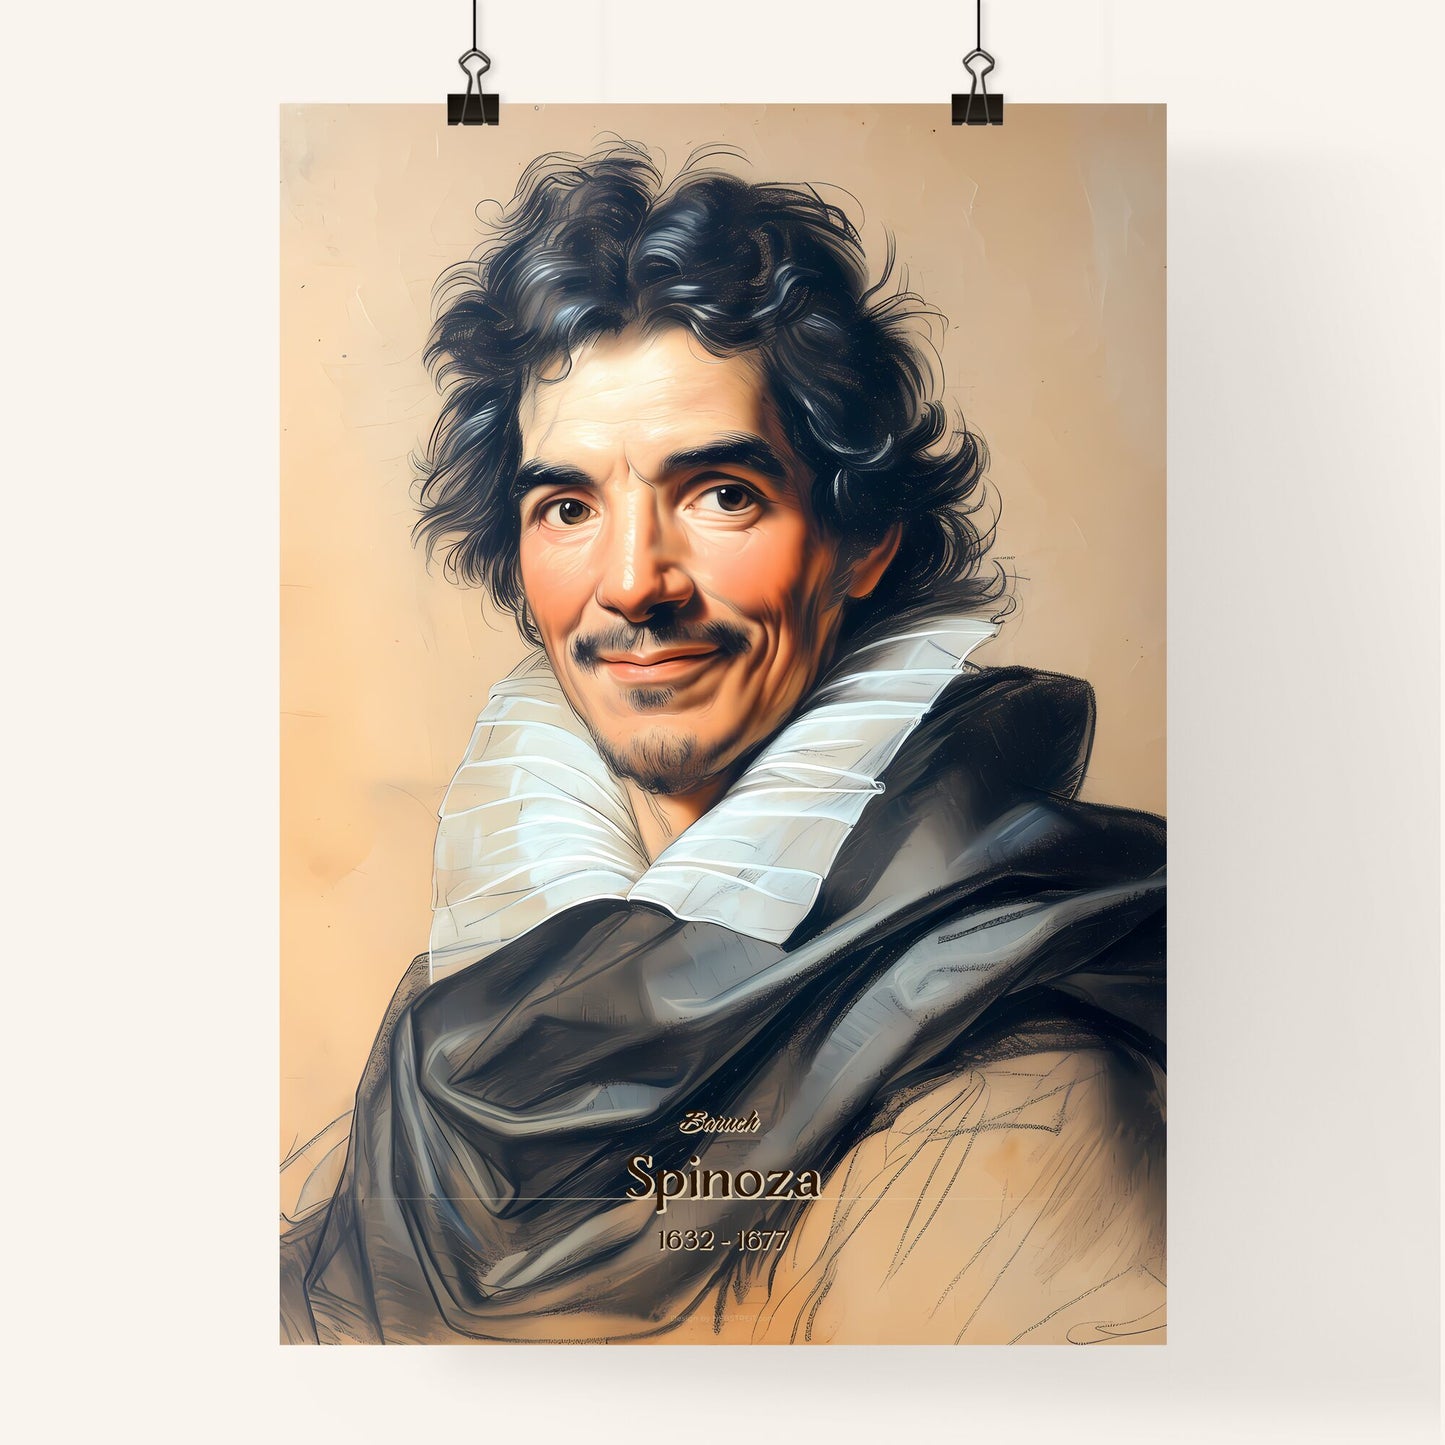 Baruch, Spinoza, 1632 - 1677, A Poster of a man with a mustache and curly hair wearing a black and white ruffled collar Default Title